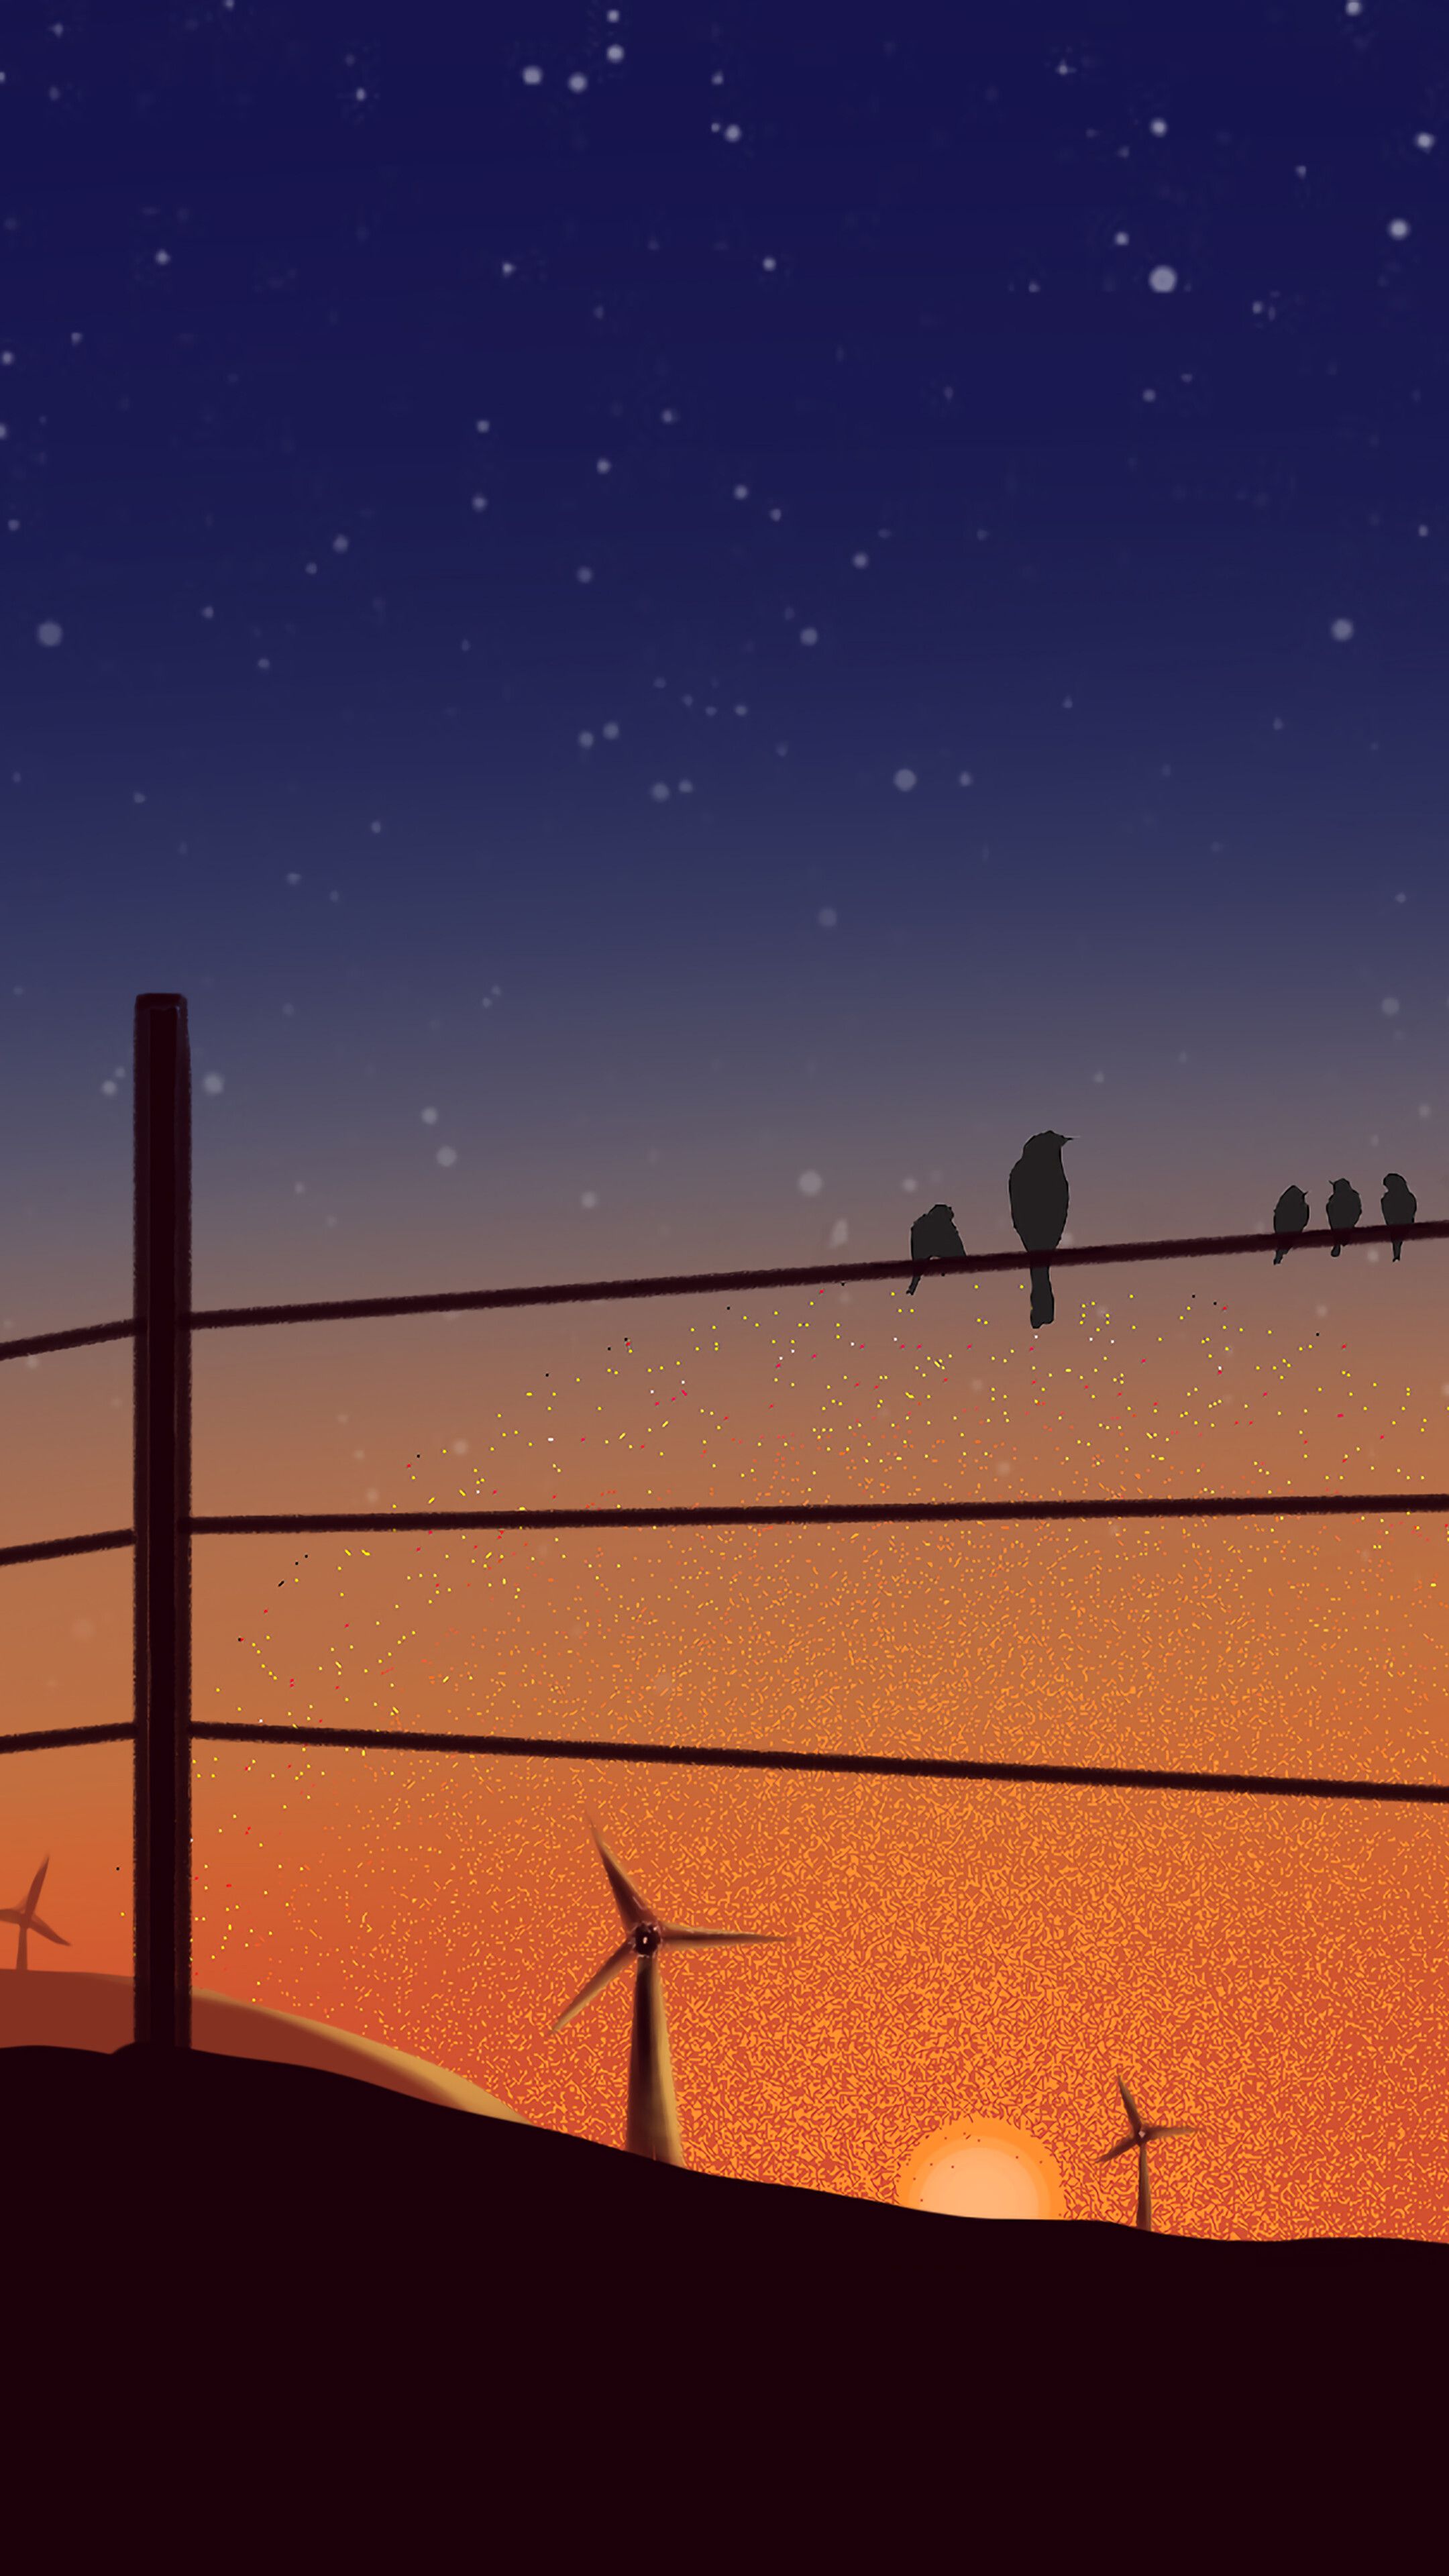 A fence with birds on it and the sun setting - Sunset